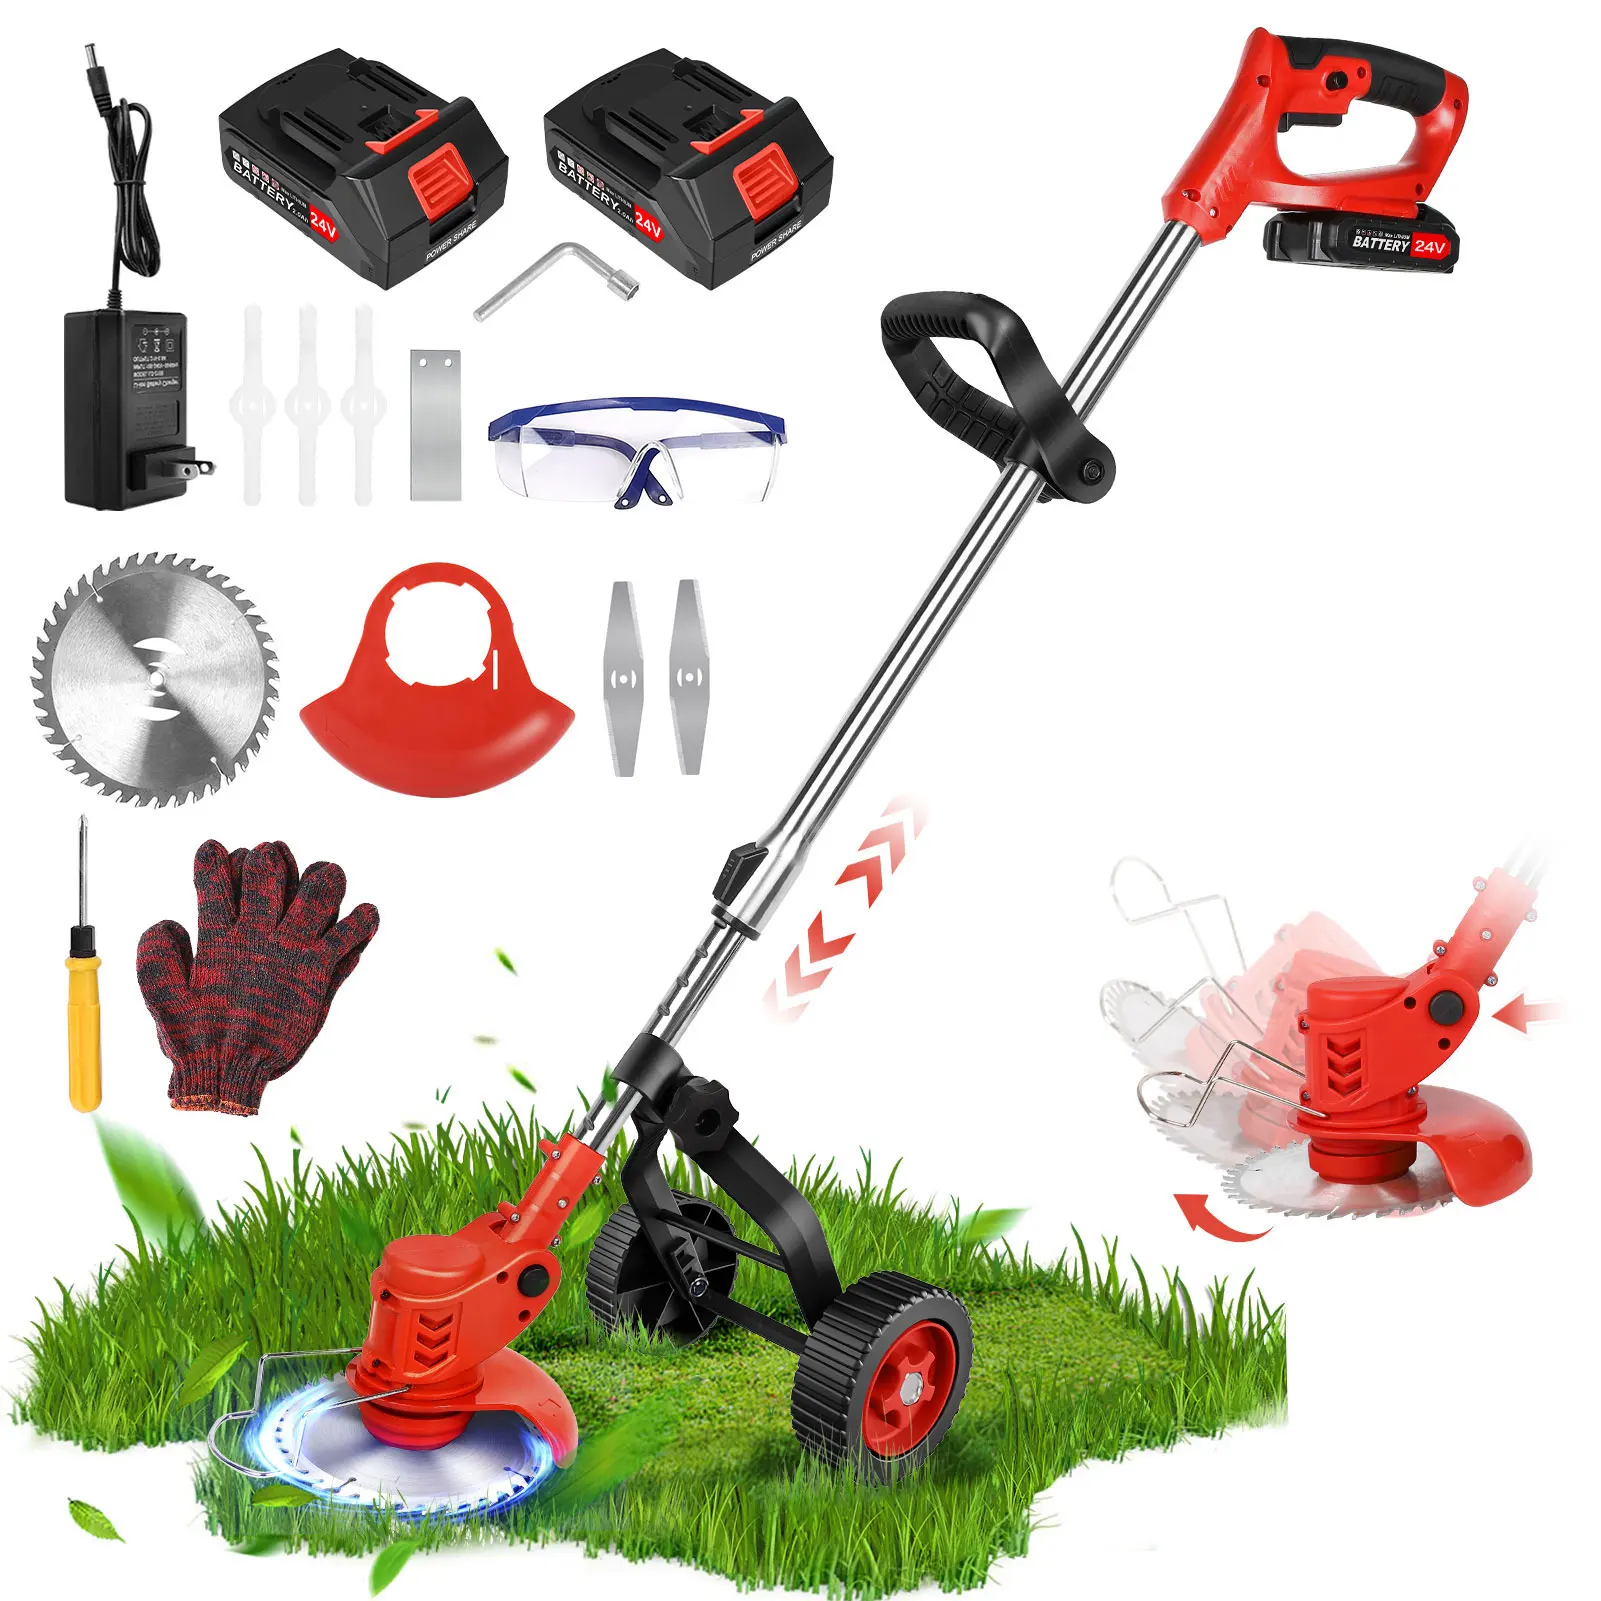 24V Electric Cordless Grass Trimmer Lawn Mower Hedge Trimmer Adjustable Handheld Garden Power Pruning Cutting Power with Wheels